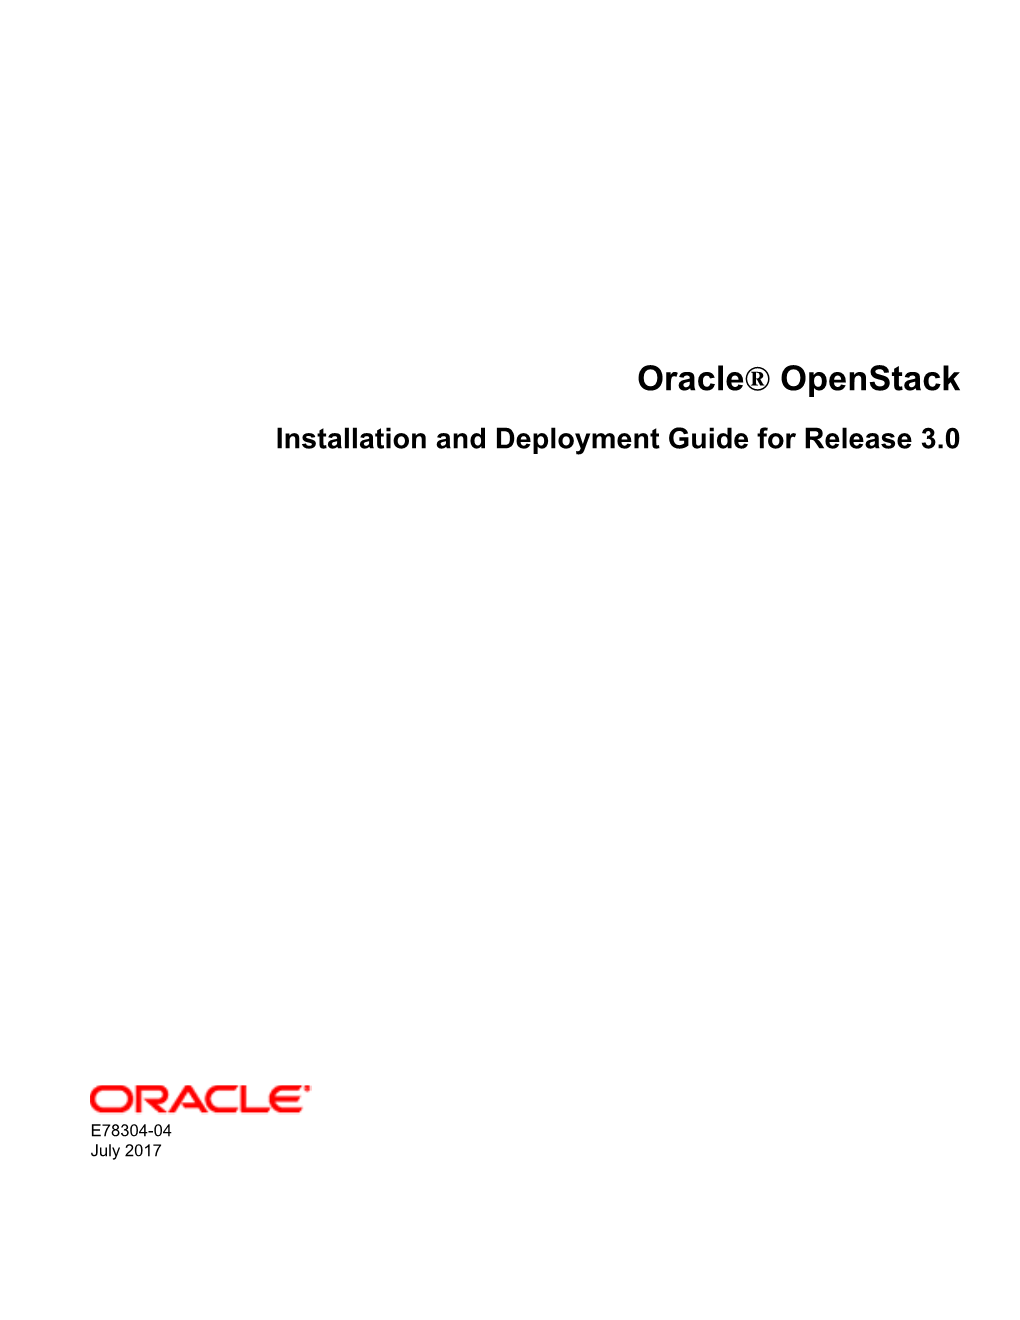 Oracle® Openstack Installation and Deployment Guide for Release 3.0